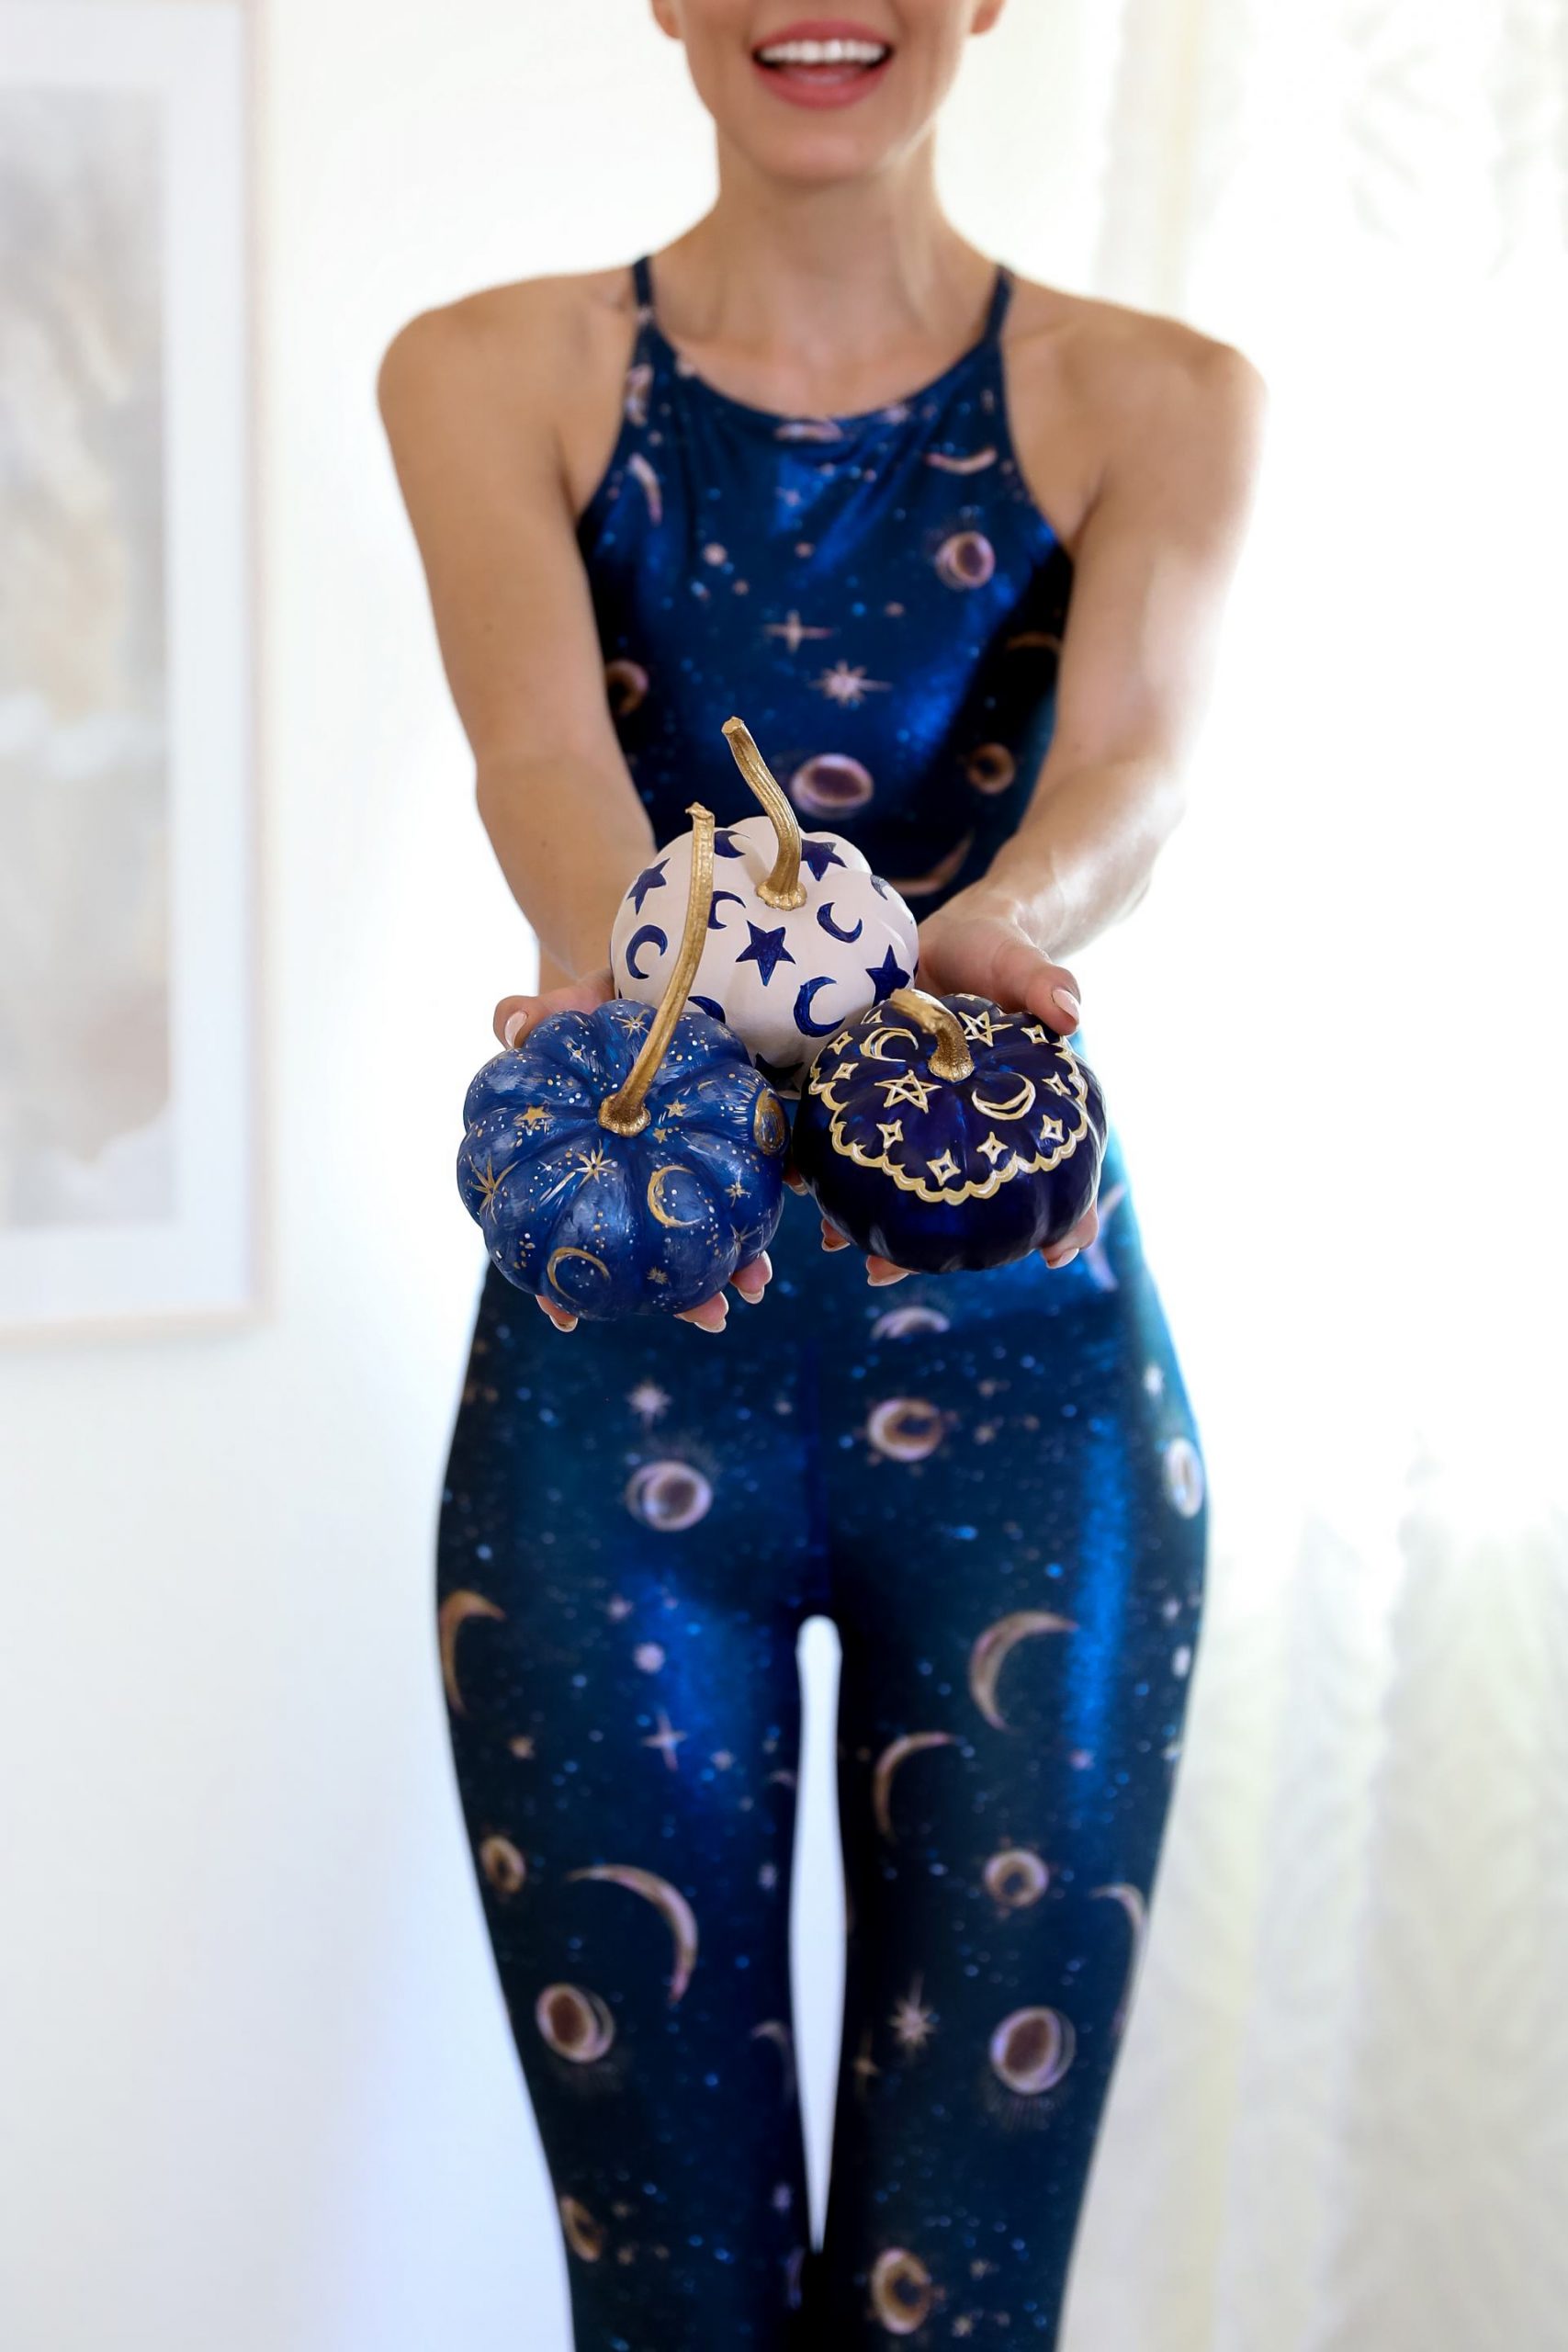 Pumpkin décor inspiration, featuring Beach Riot’s new celestial collection leggings and sports bras. Handmade Fall and Halloween décor by Lombard & Fifth, Veronica Levy.